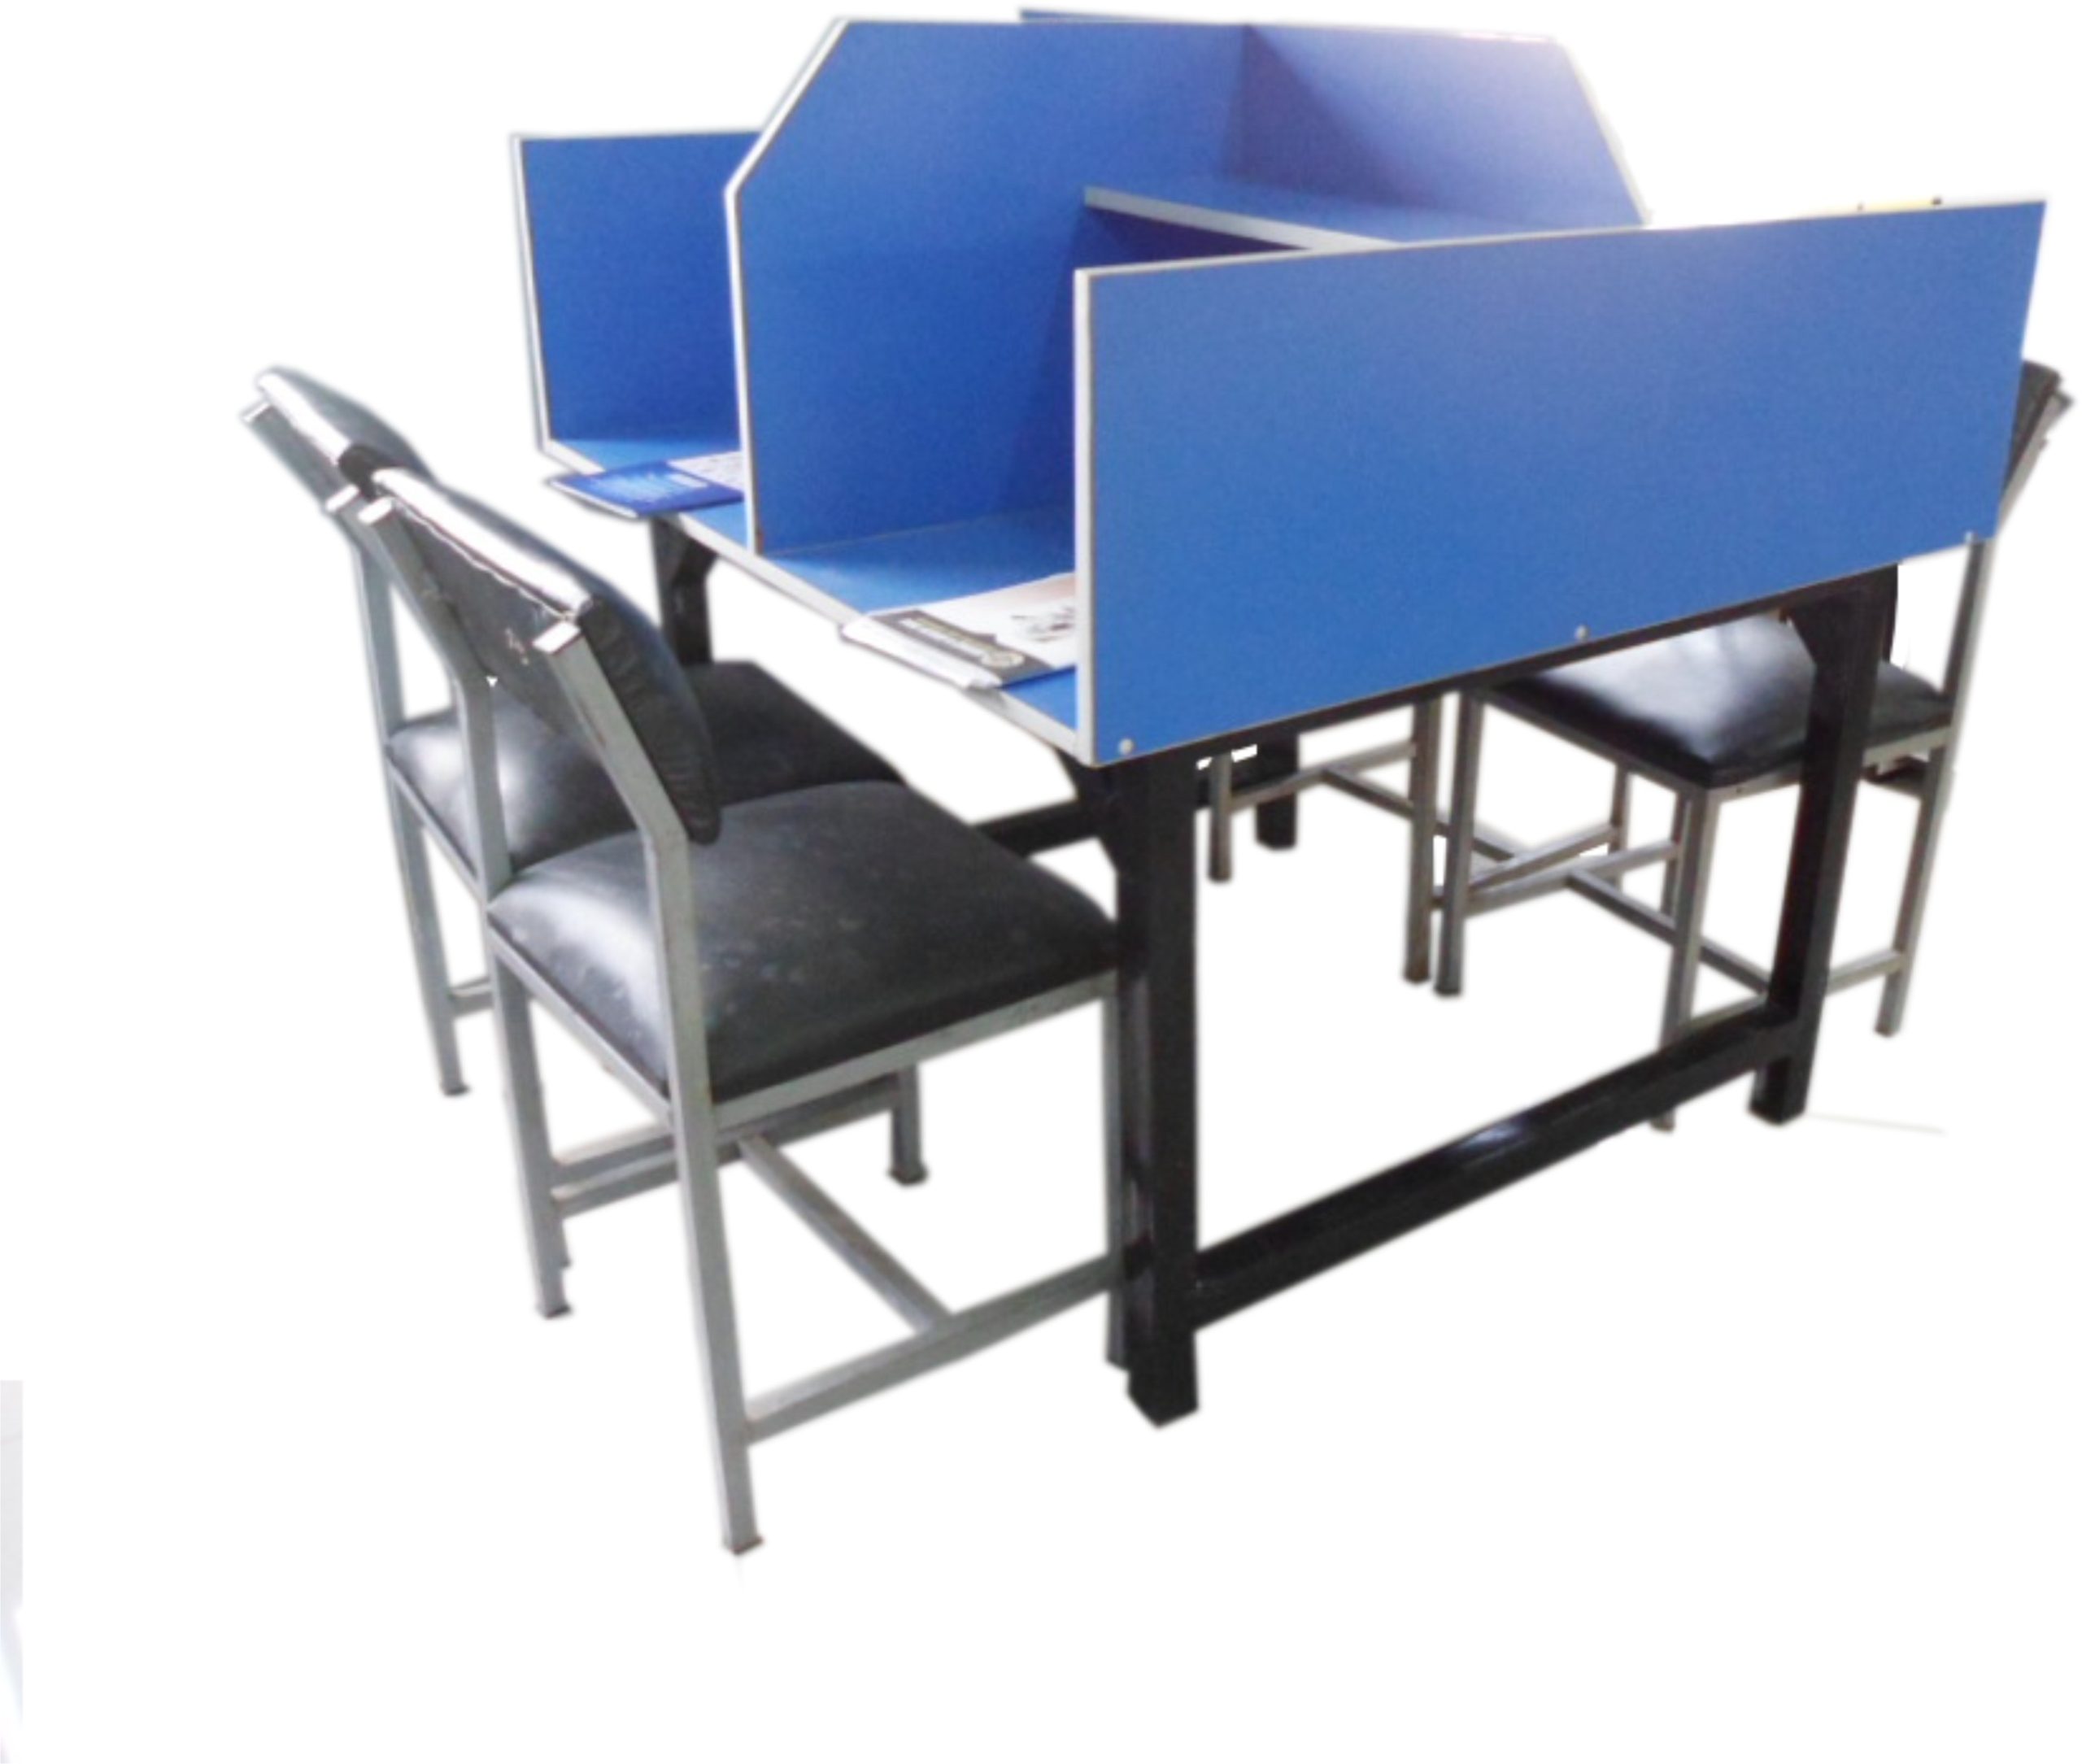 library-study-carrels-for-four-users